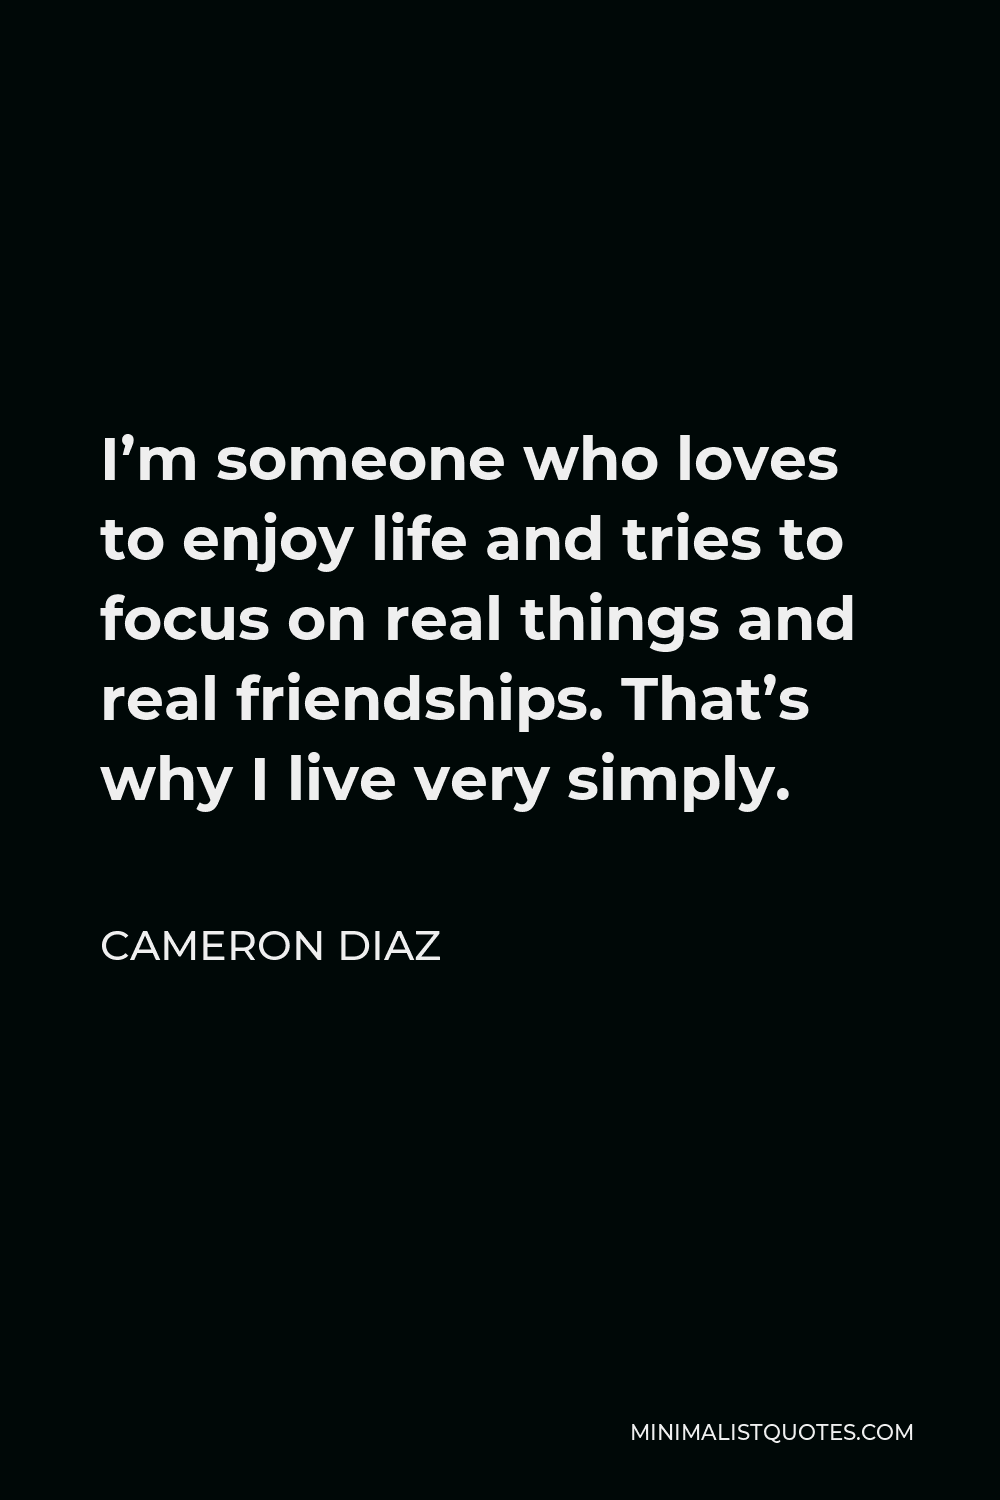 Cameron Diaz Quote - I’m someone who loves to enjoy life and tries to focus on real things and real friendships. That’s why I live very simply.